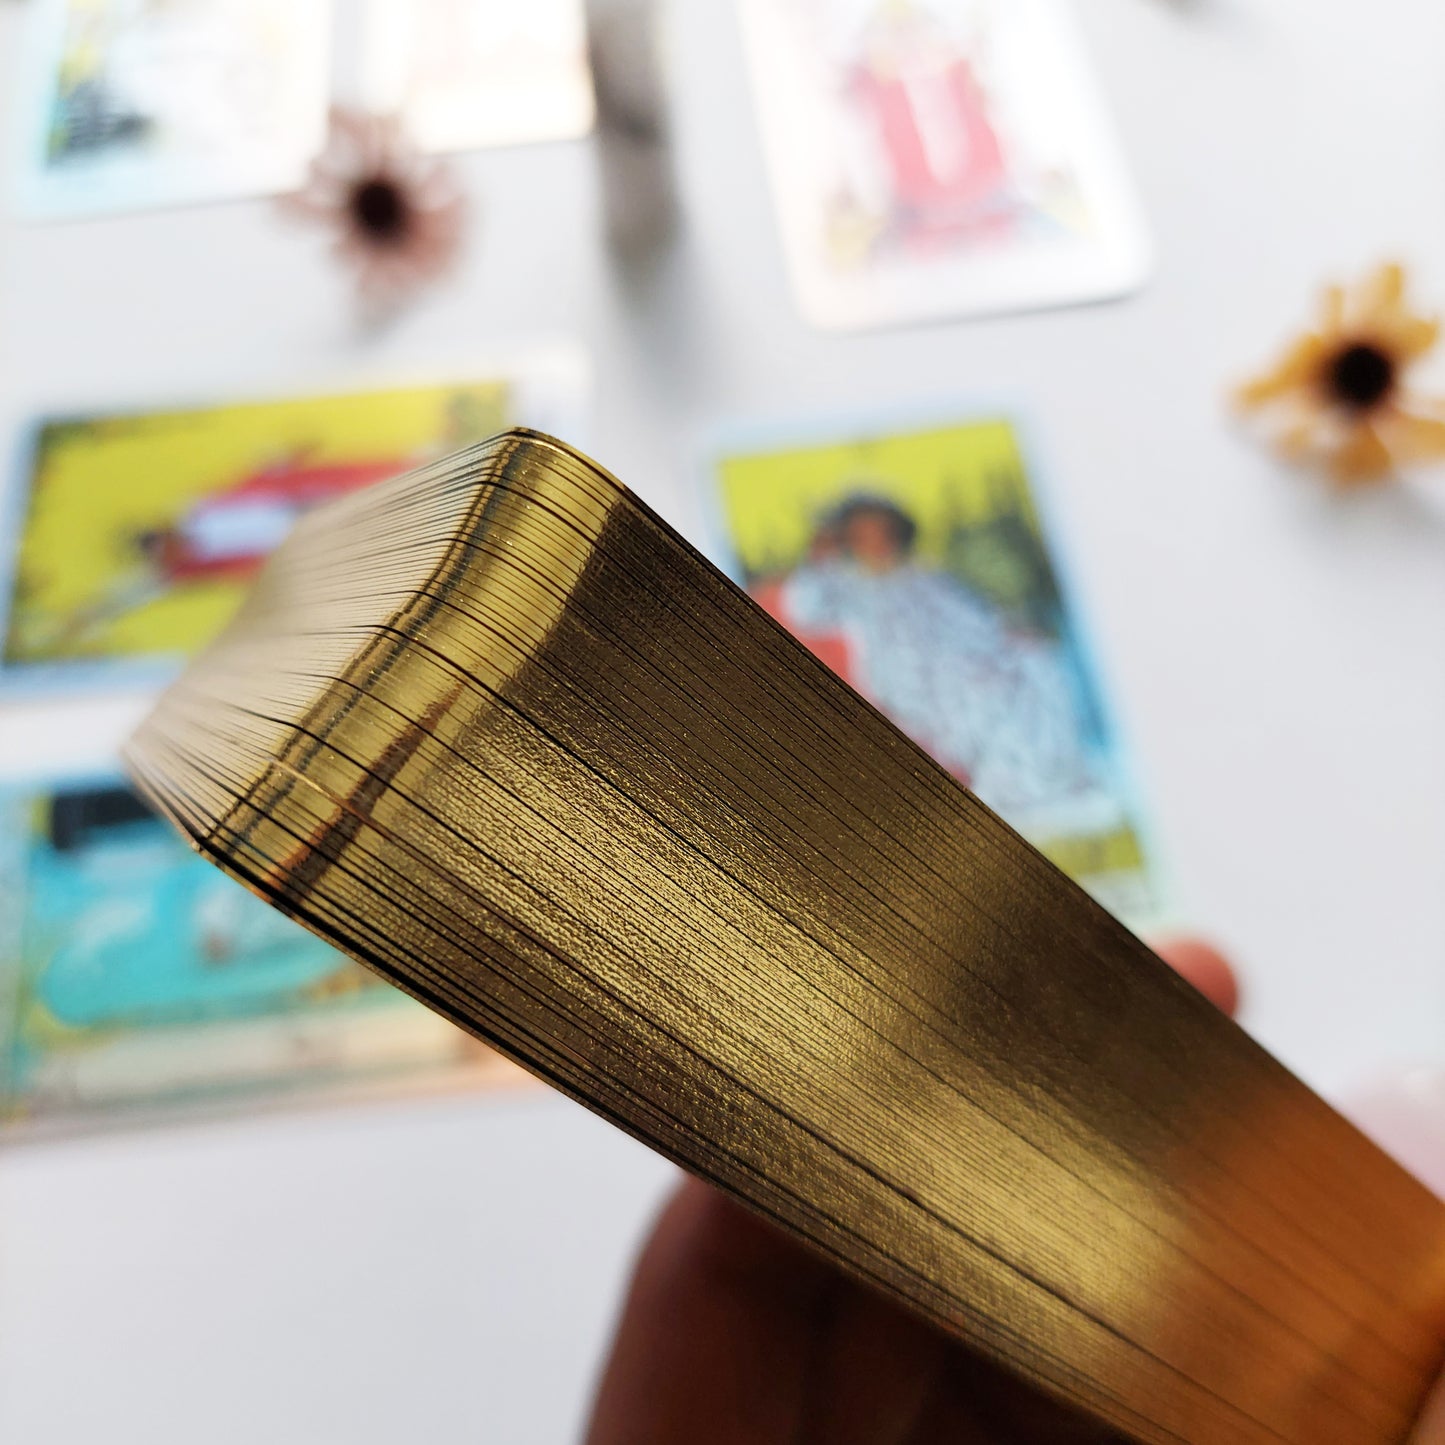 Holographic Mahogany Tarot Deck Limited Edition (GOLD GILDING with THIN CARD STOCK) Size 2.75”x4.75”